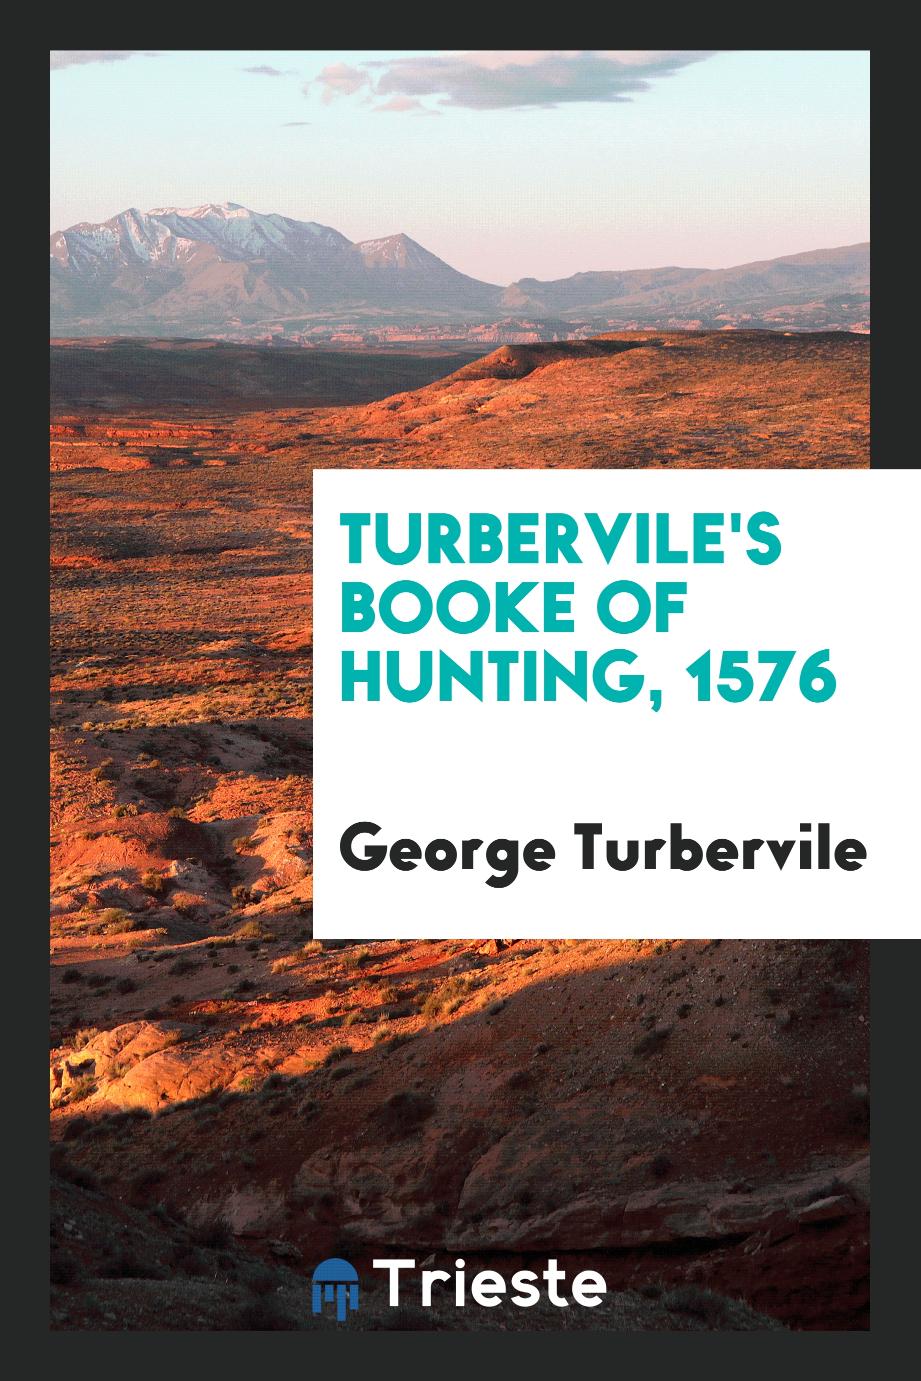 Turbervile's Booke of hunting, 1576